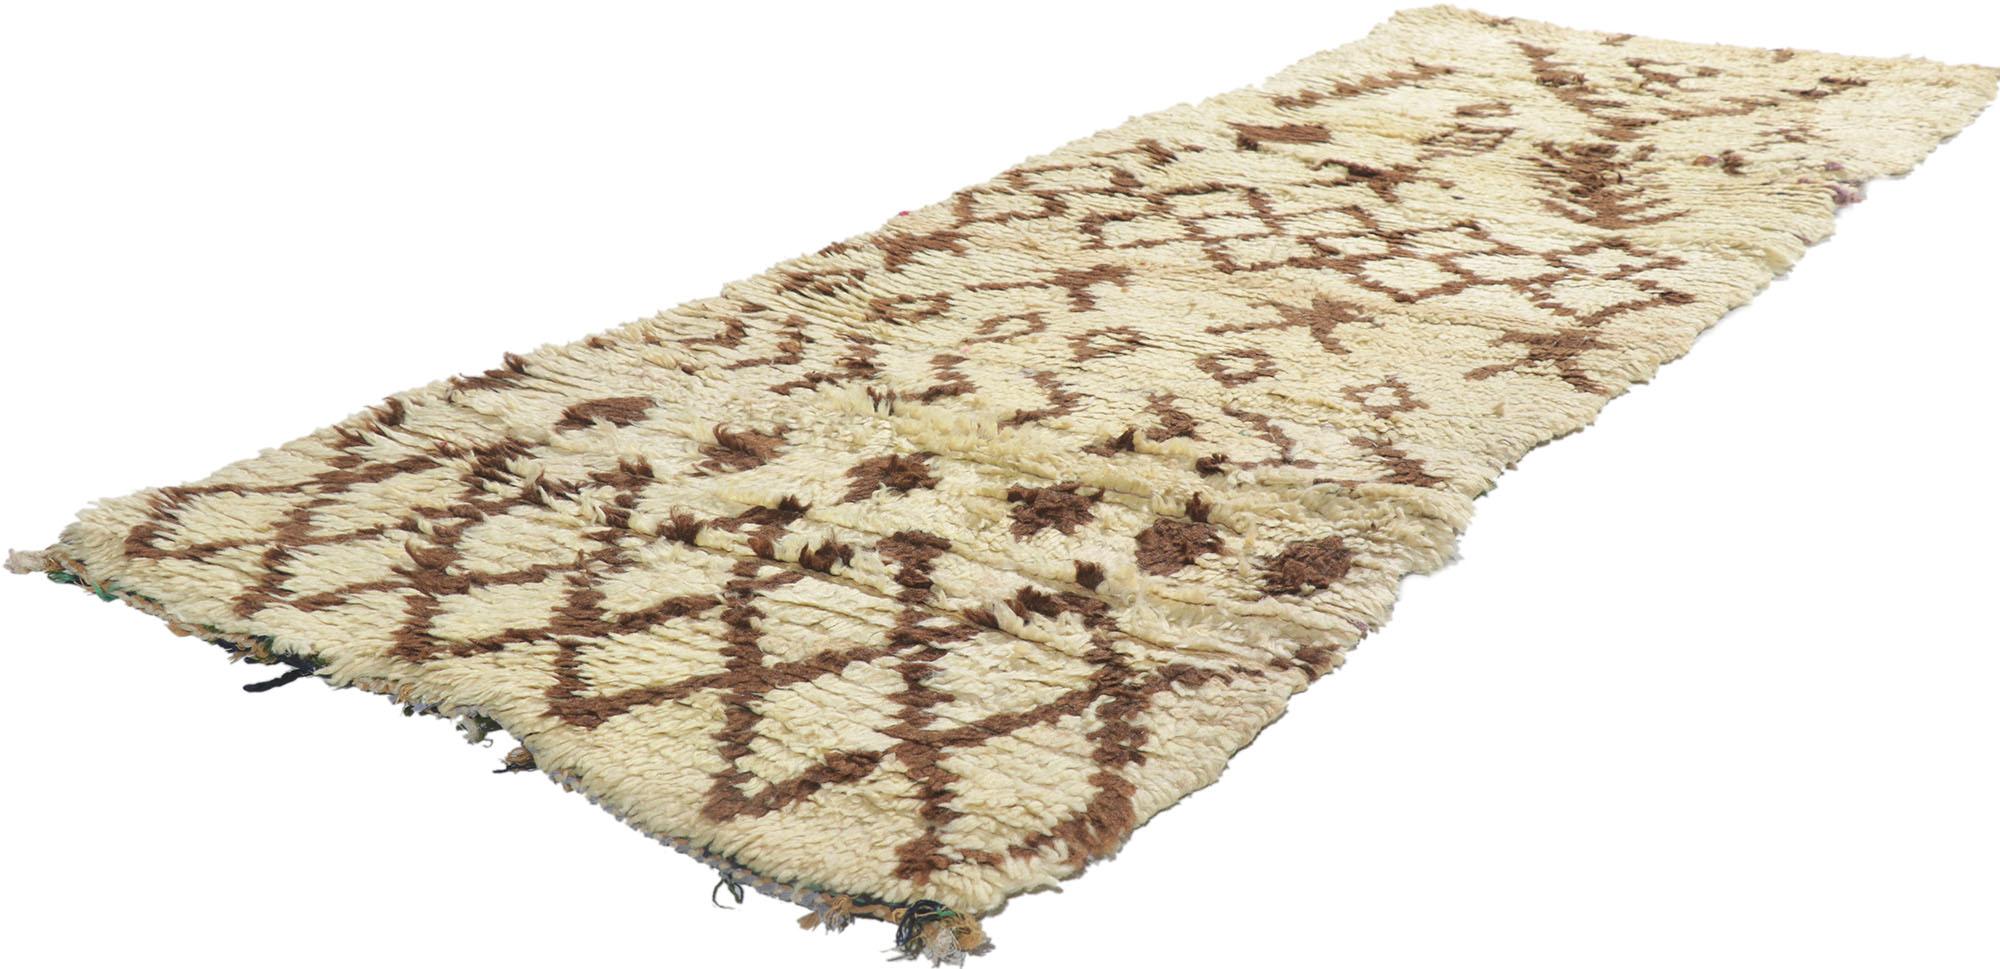 21633 Vintage Berber Moroccan Azilal rug with Modern Tribal Style 02'05 x 06'08. With its simplicity, tribal style, incredible detail and texture, this hand knotted wool vintage Berber Moroccan Azilal rug is a captivating vision of woven beauty. The